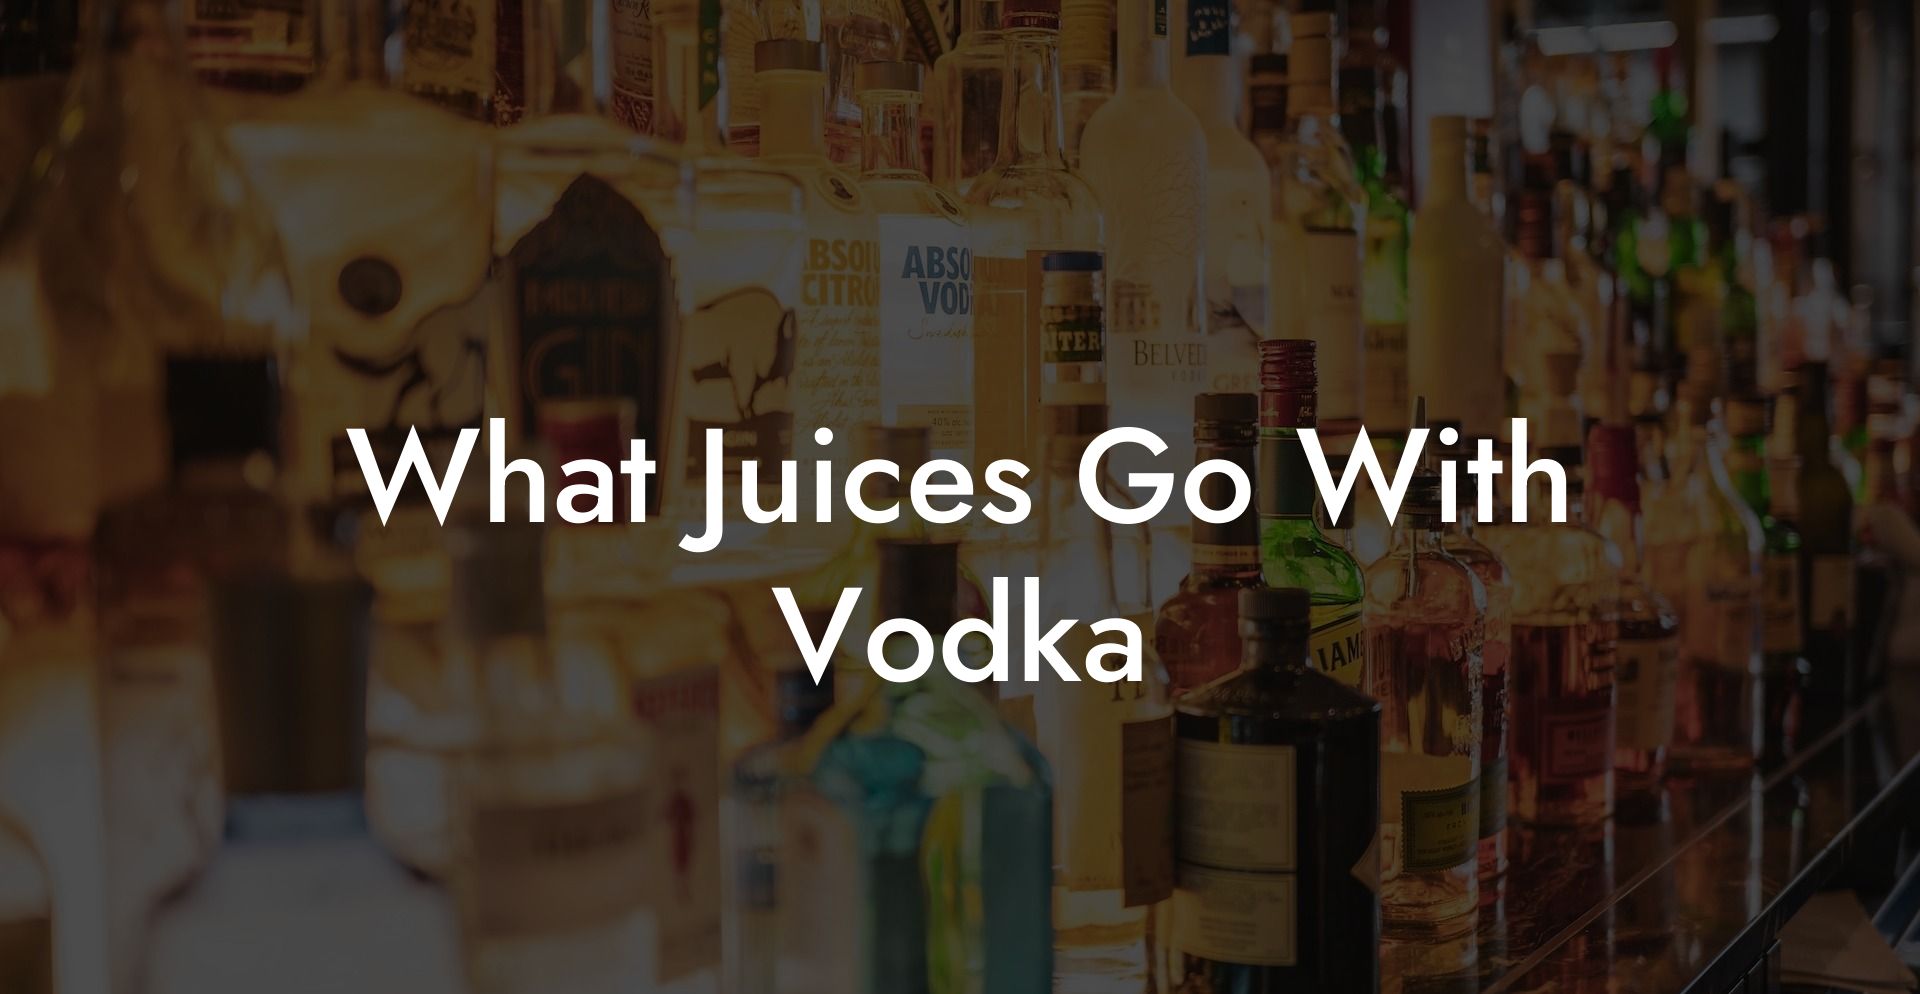 What Juices Go With Vodka